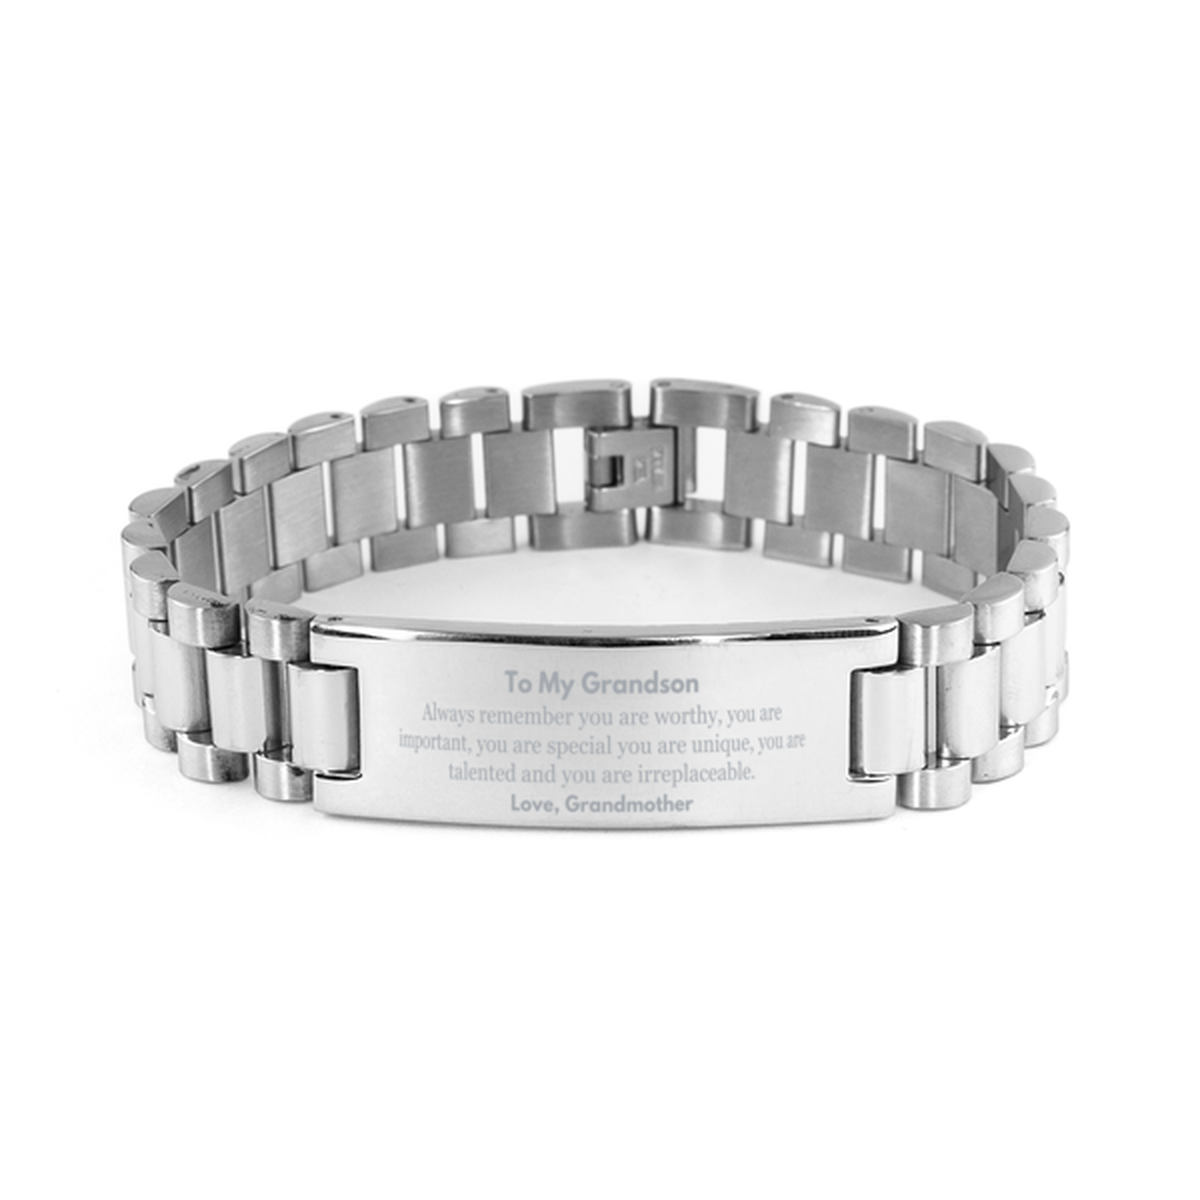 Grandson Birthday Gifts from Grandmother, Inspirational Ladder Stainless Steel Bracelet for Grandson Christmas Graduation Gifts for Grandson Always remember you are worthy, you are important. Love, Grandmother